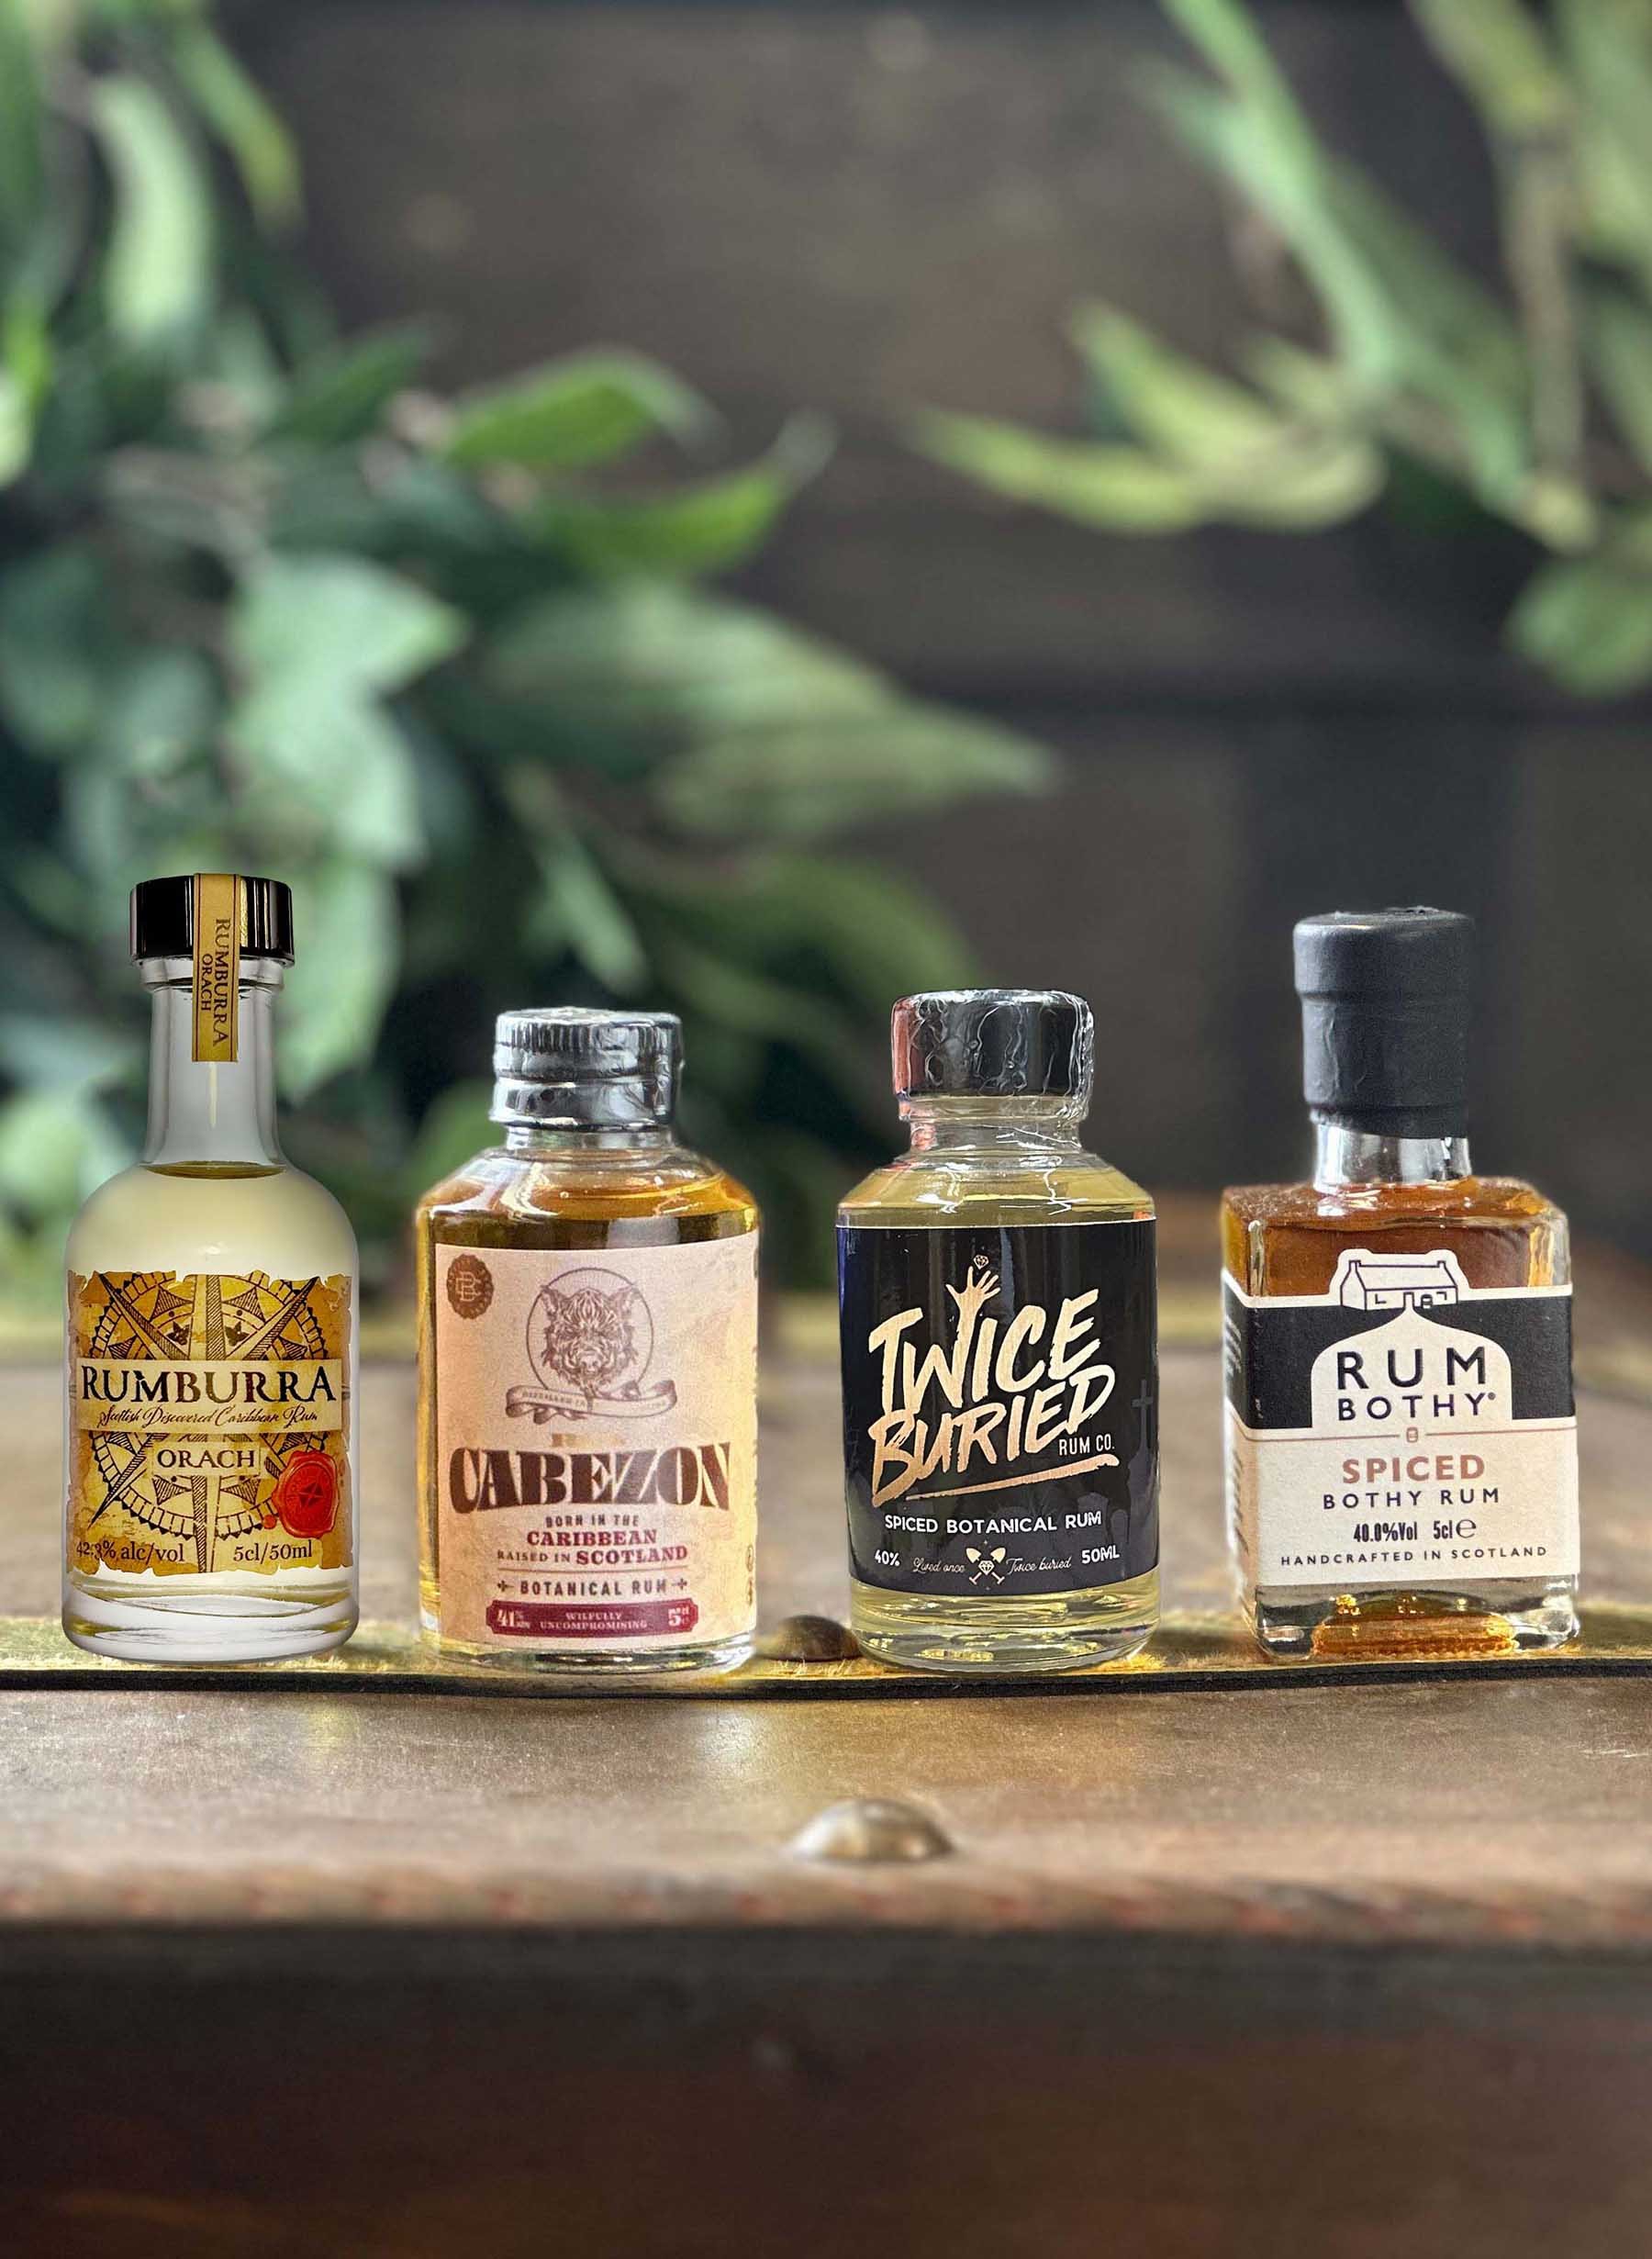 The Ultimate Rum Gift Rum Sets — Company Buy The Box Gift - Rum | Online Rum The - Company Rum Subscription | (12x50ml)